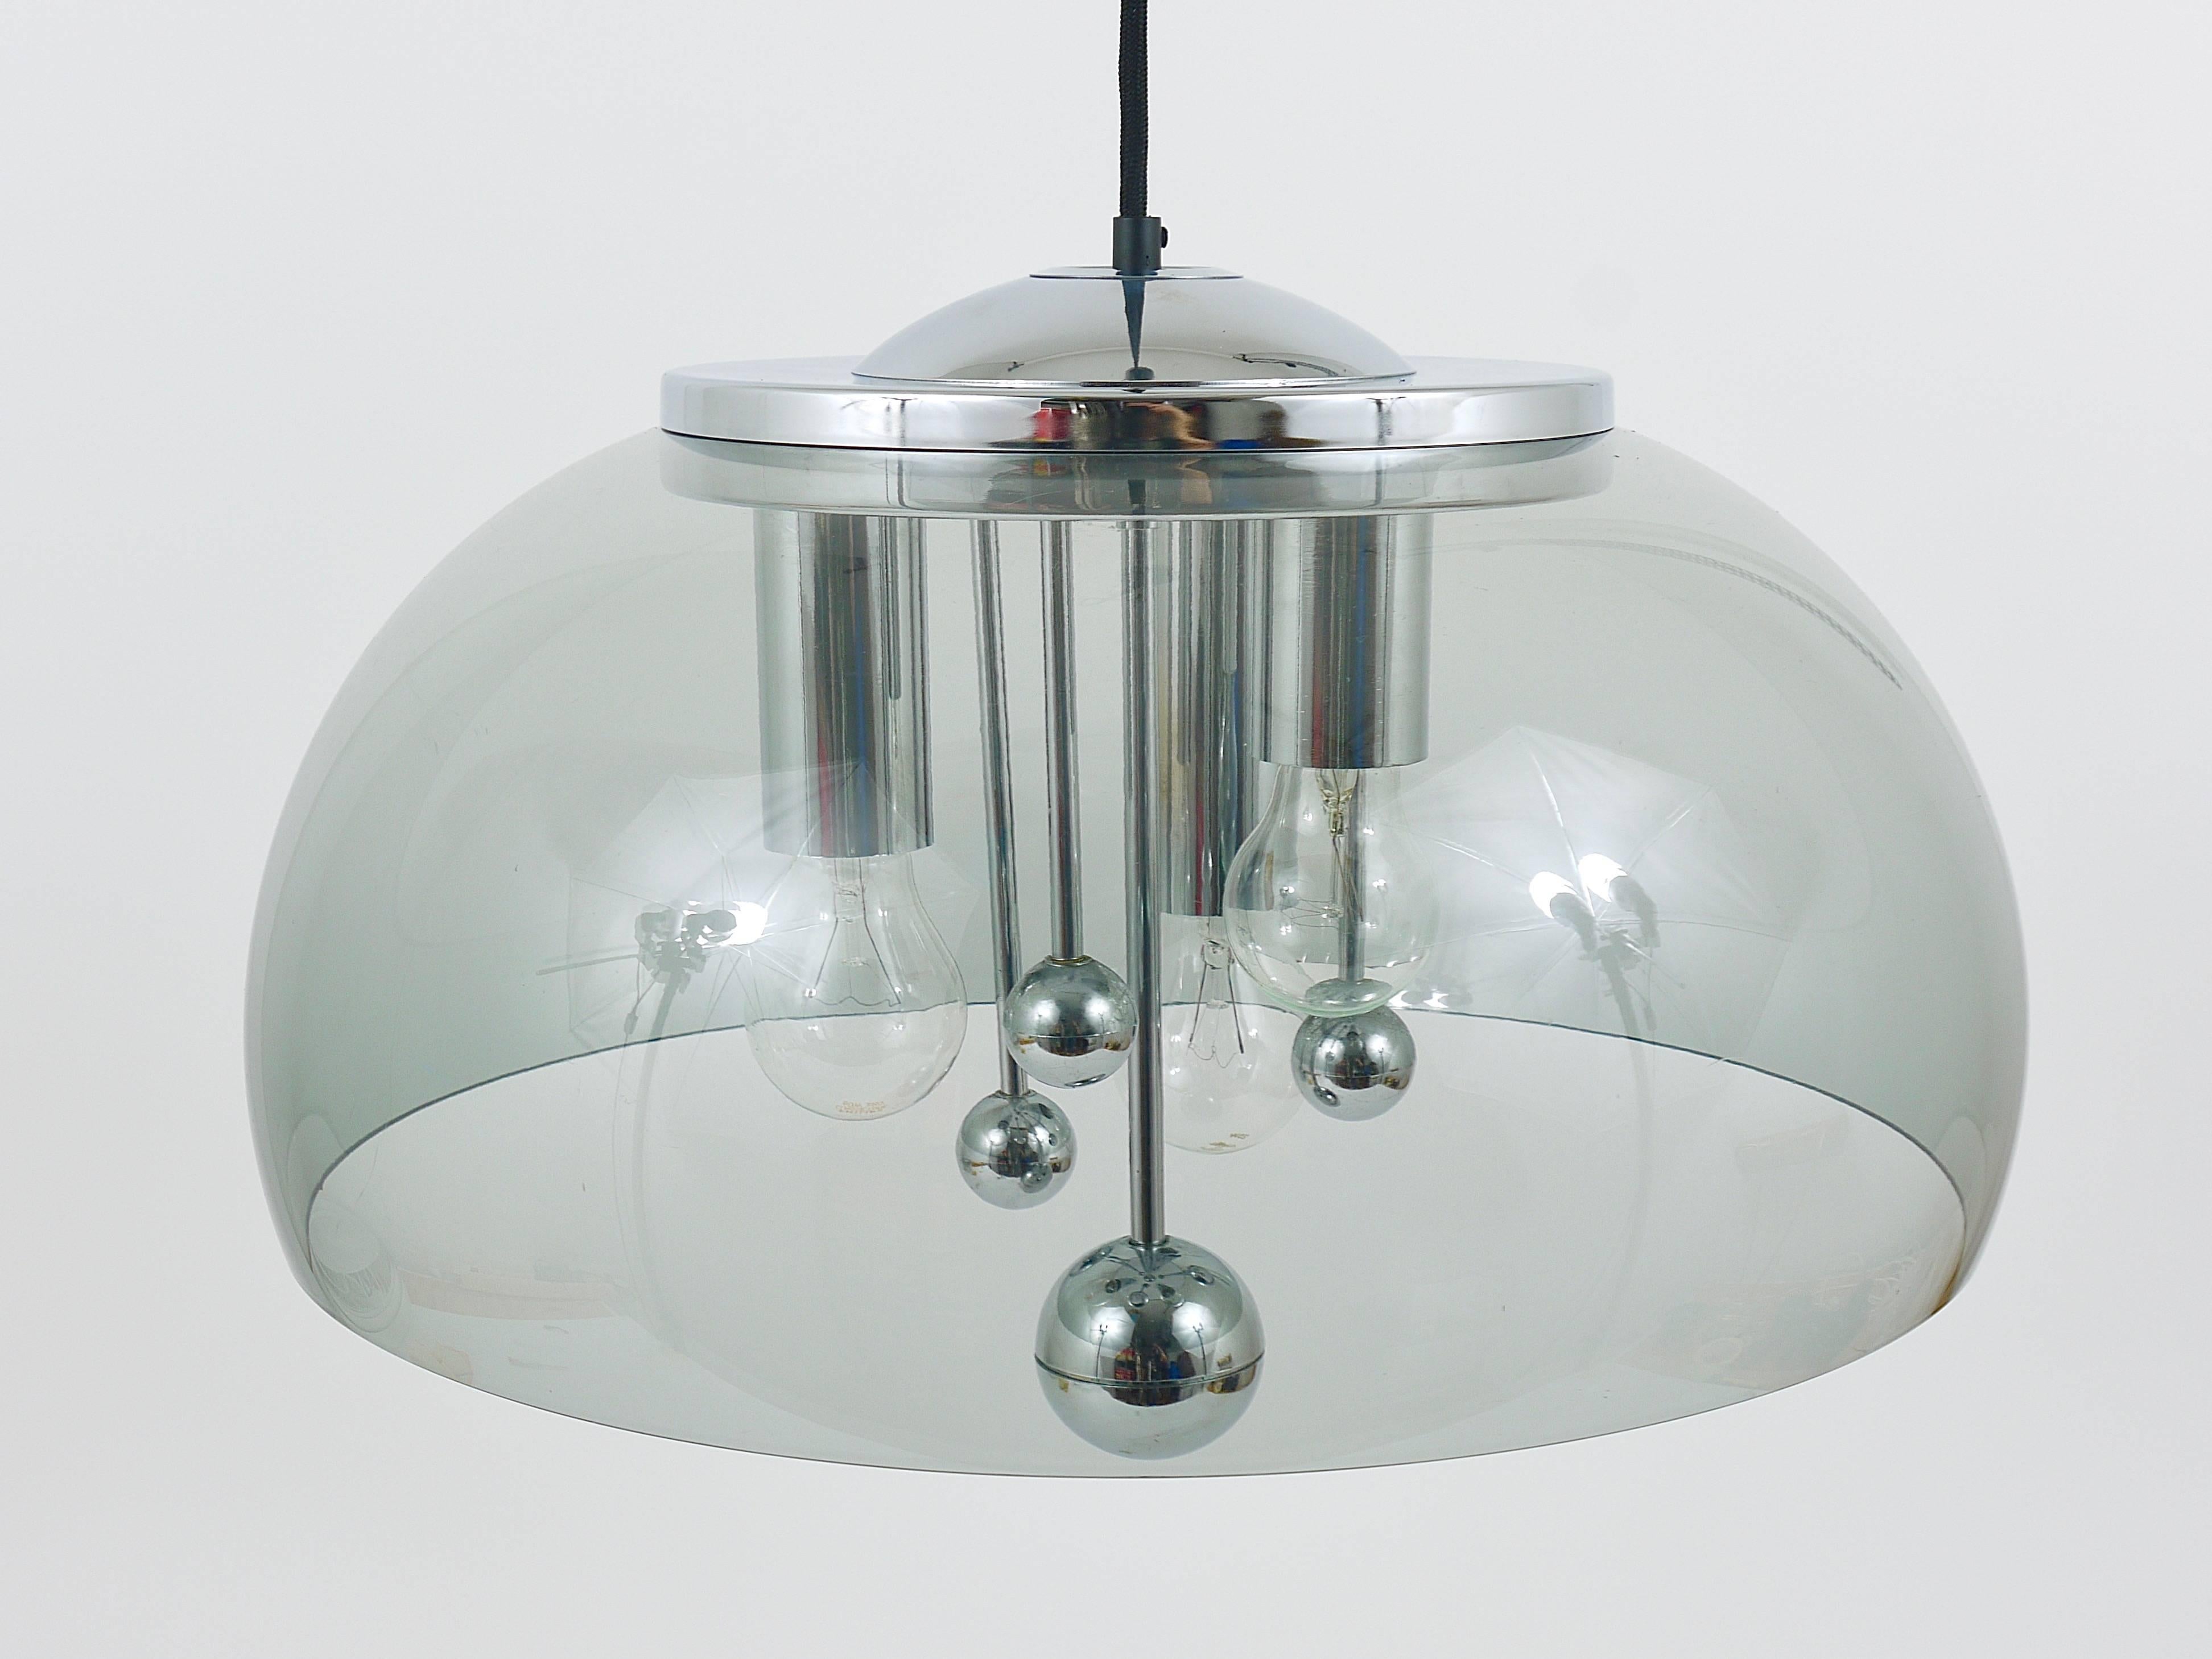 Metal Midcentury Space Age Globe Pendant Lamp with Chromed Spheres, Germany, 1970s For Sale